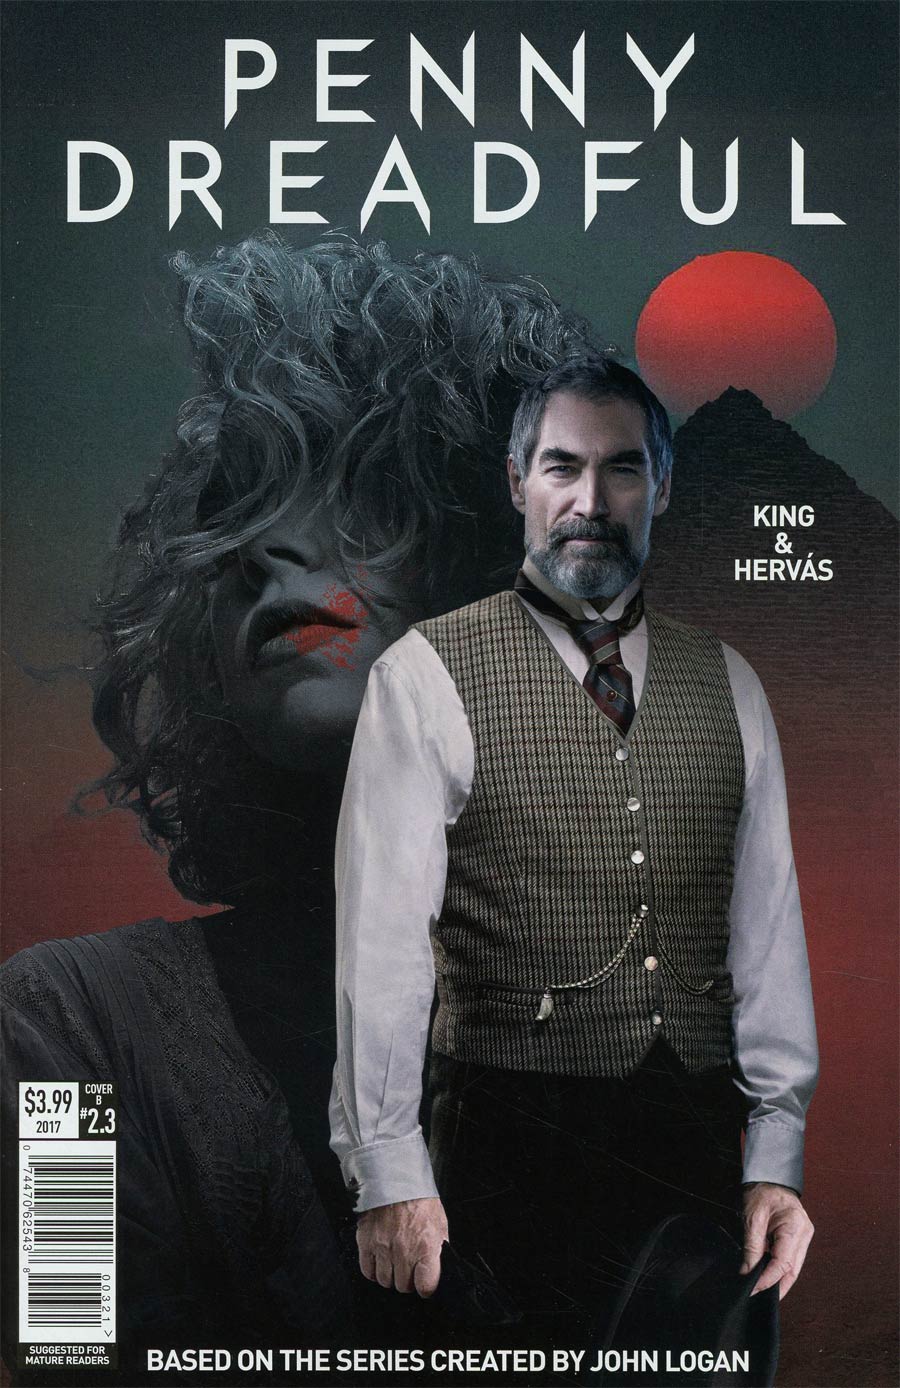 Penny Dreadful Vol 2 #3 Cover B Variant Photo Cover